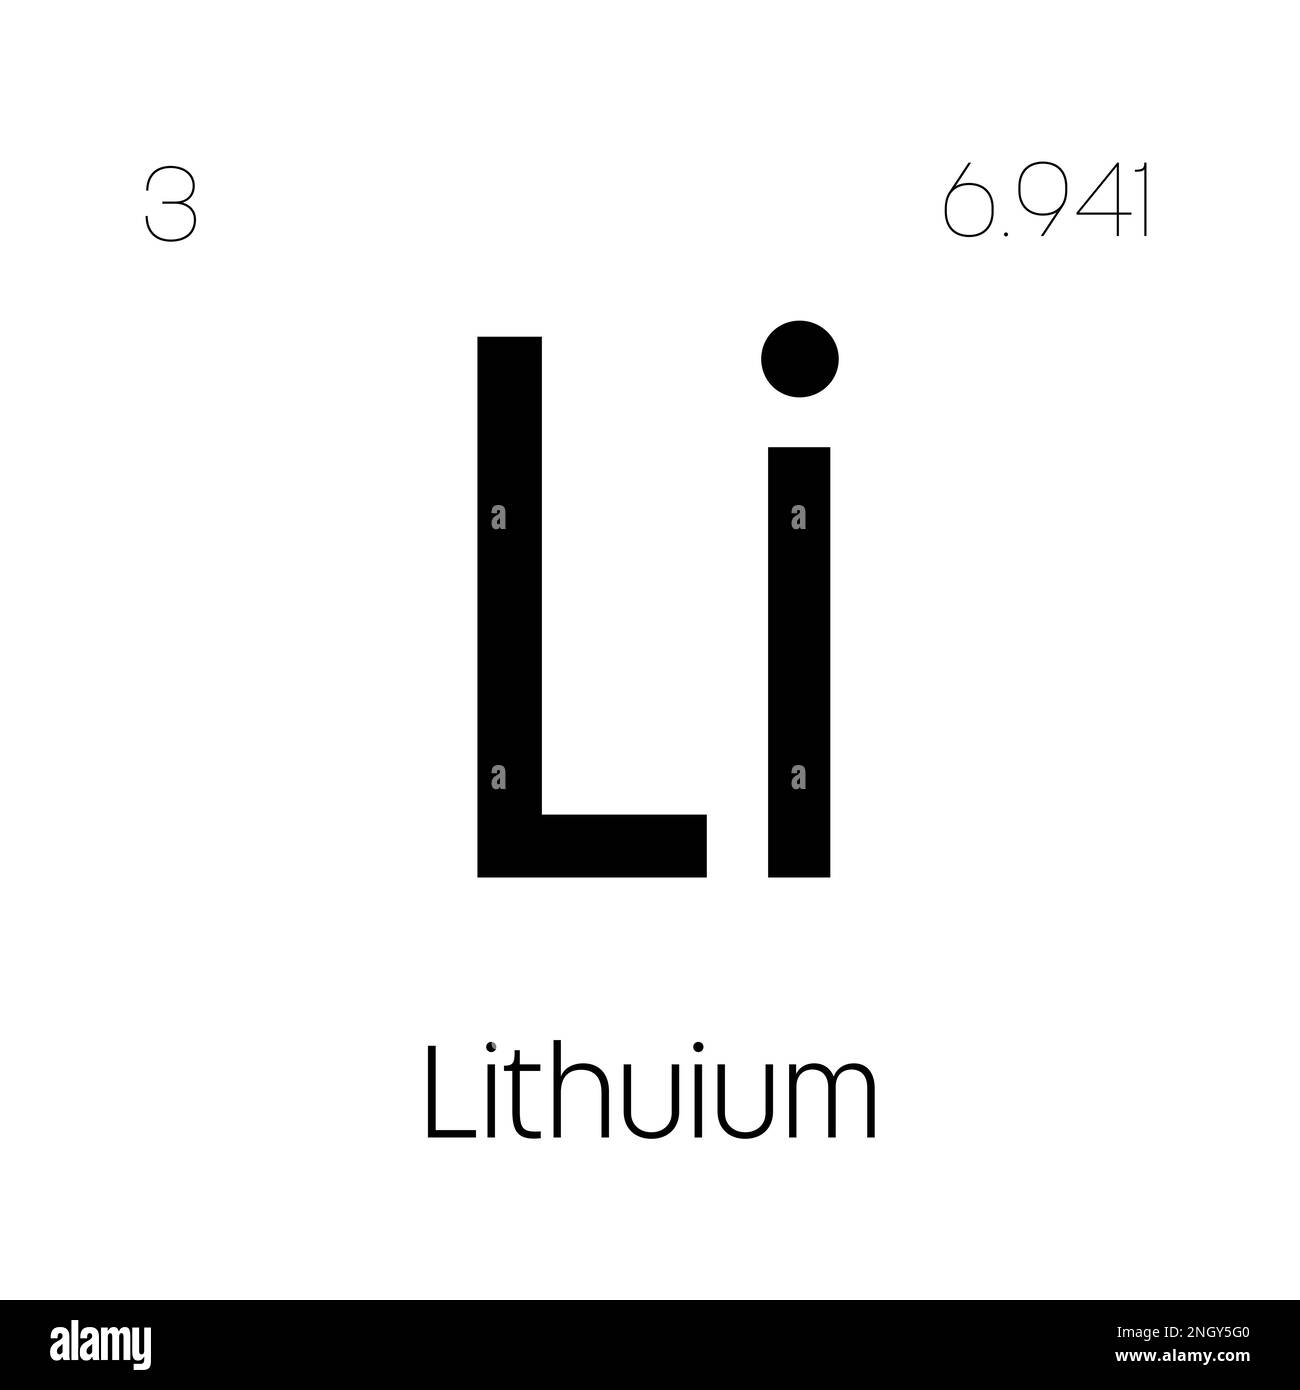 Lithium, Li, periodic table element with name, symbol, atomic number and weight. Alkali metal with various industrial uses, such as in batteries, ceramics, and as a medication for bipolar disorder. Stock Vector